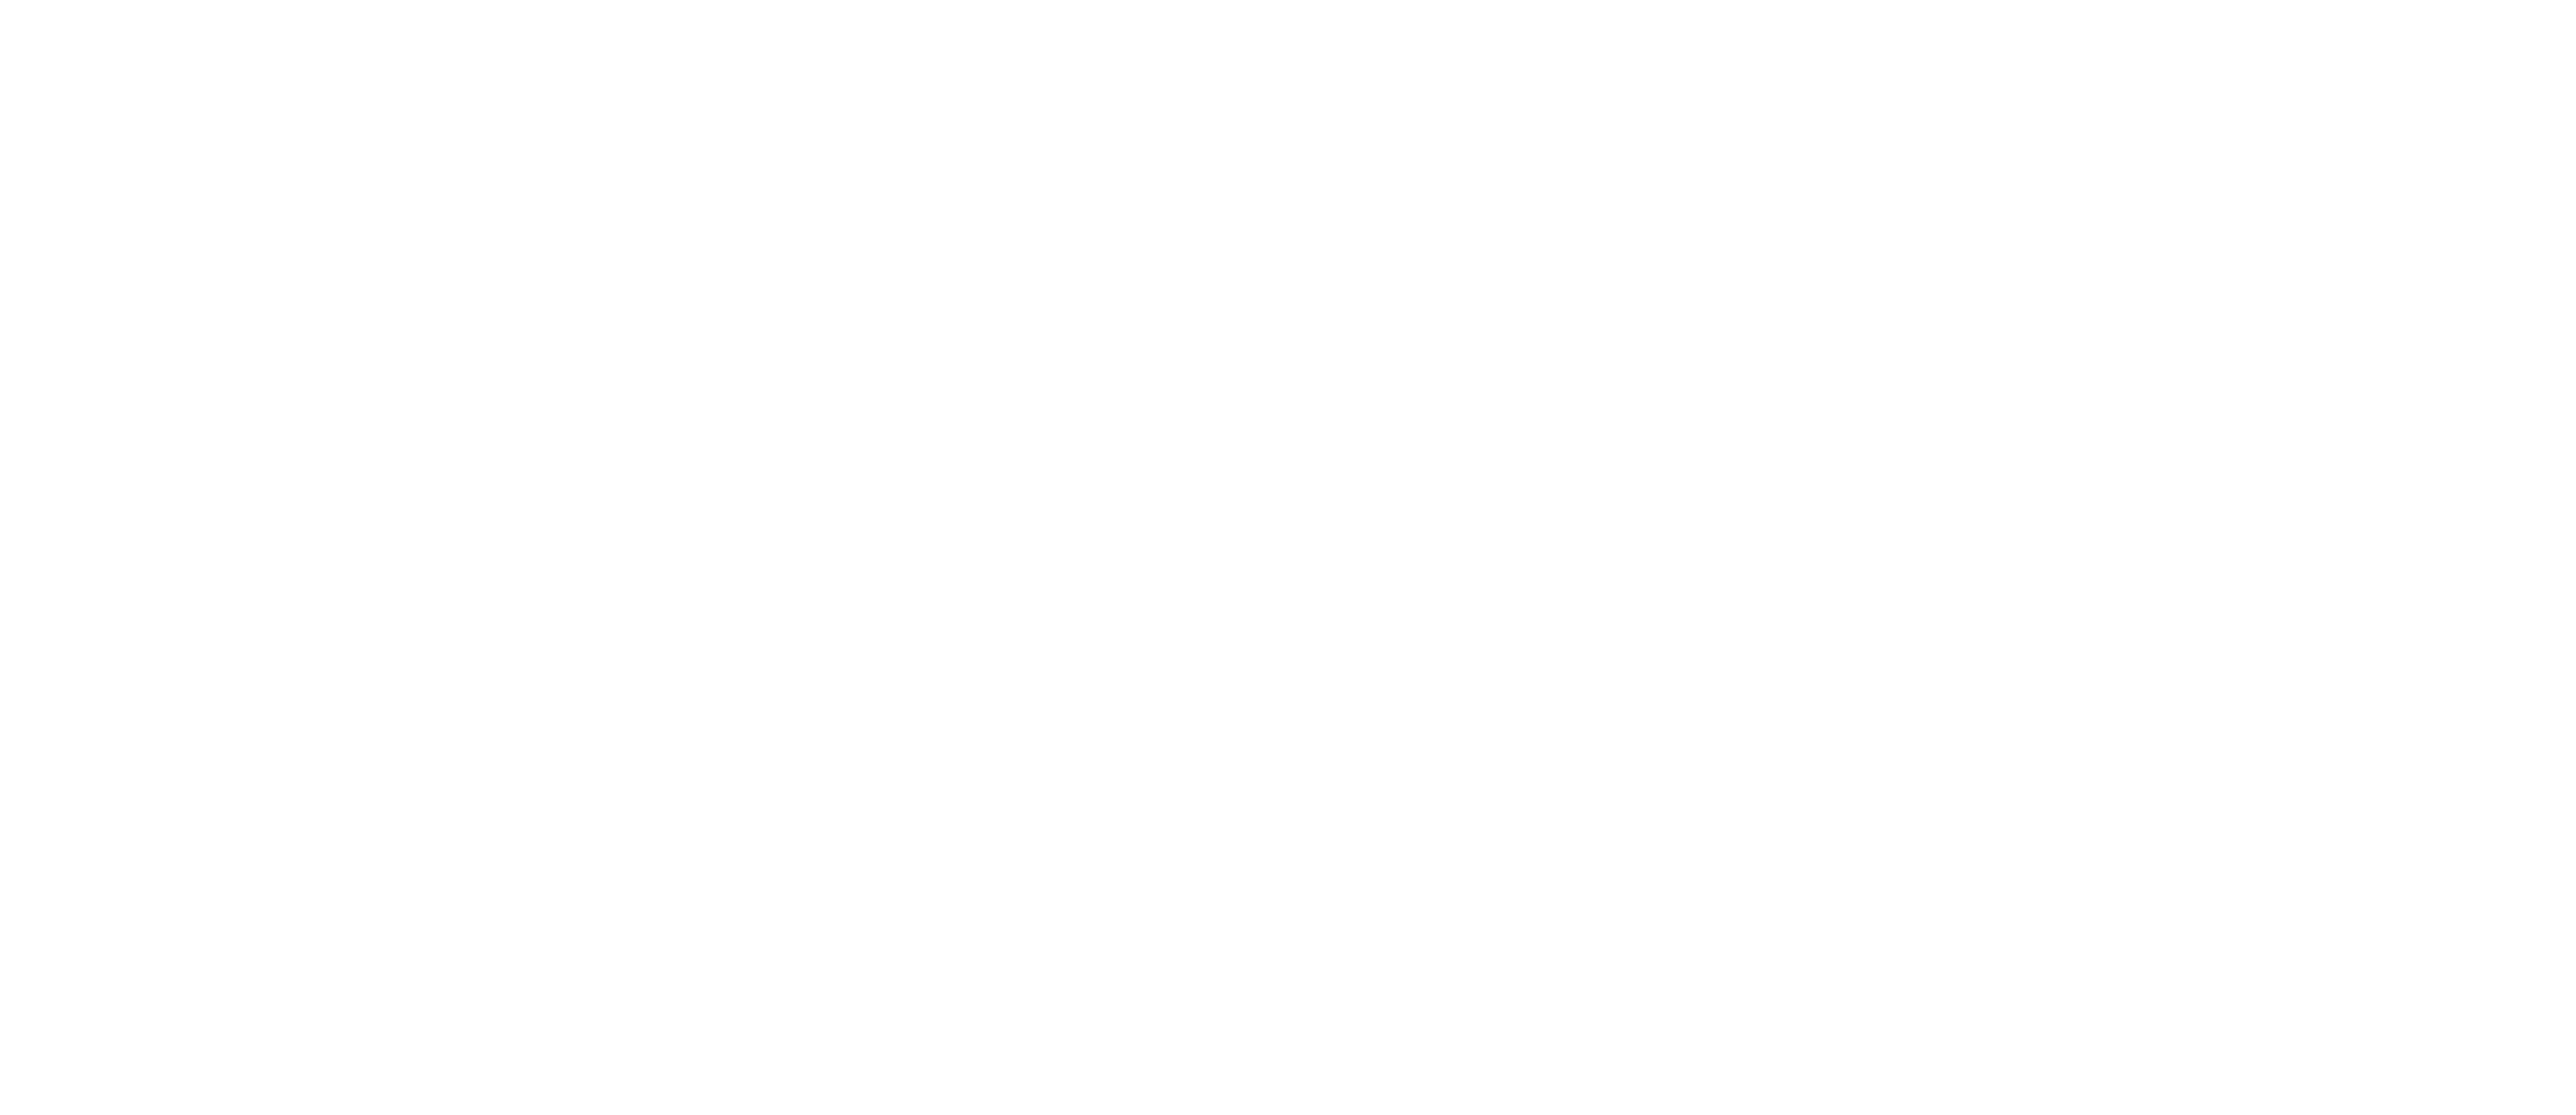 Swiss Coffee Connection